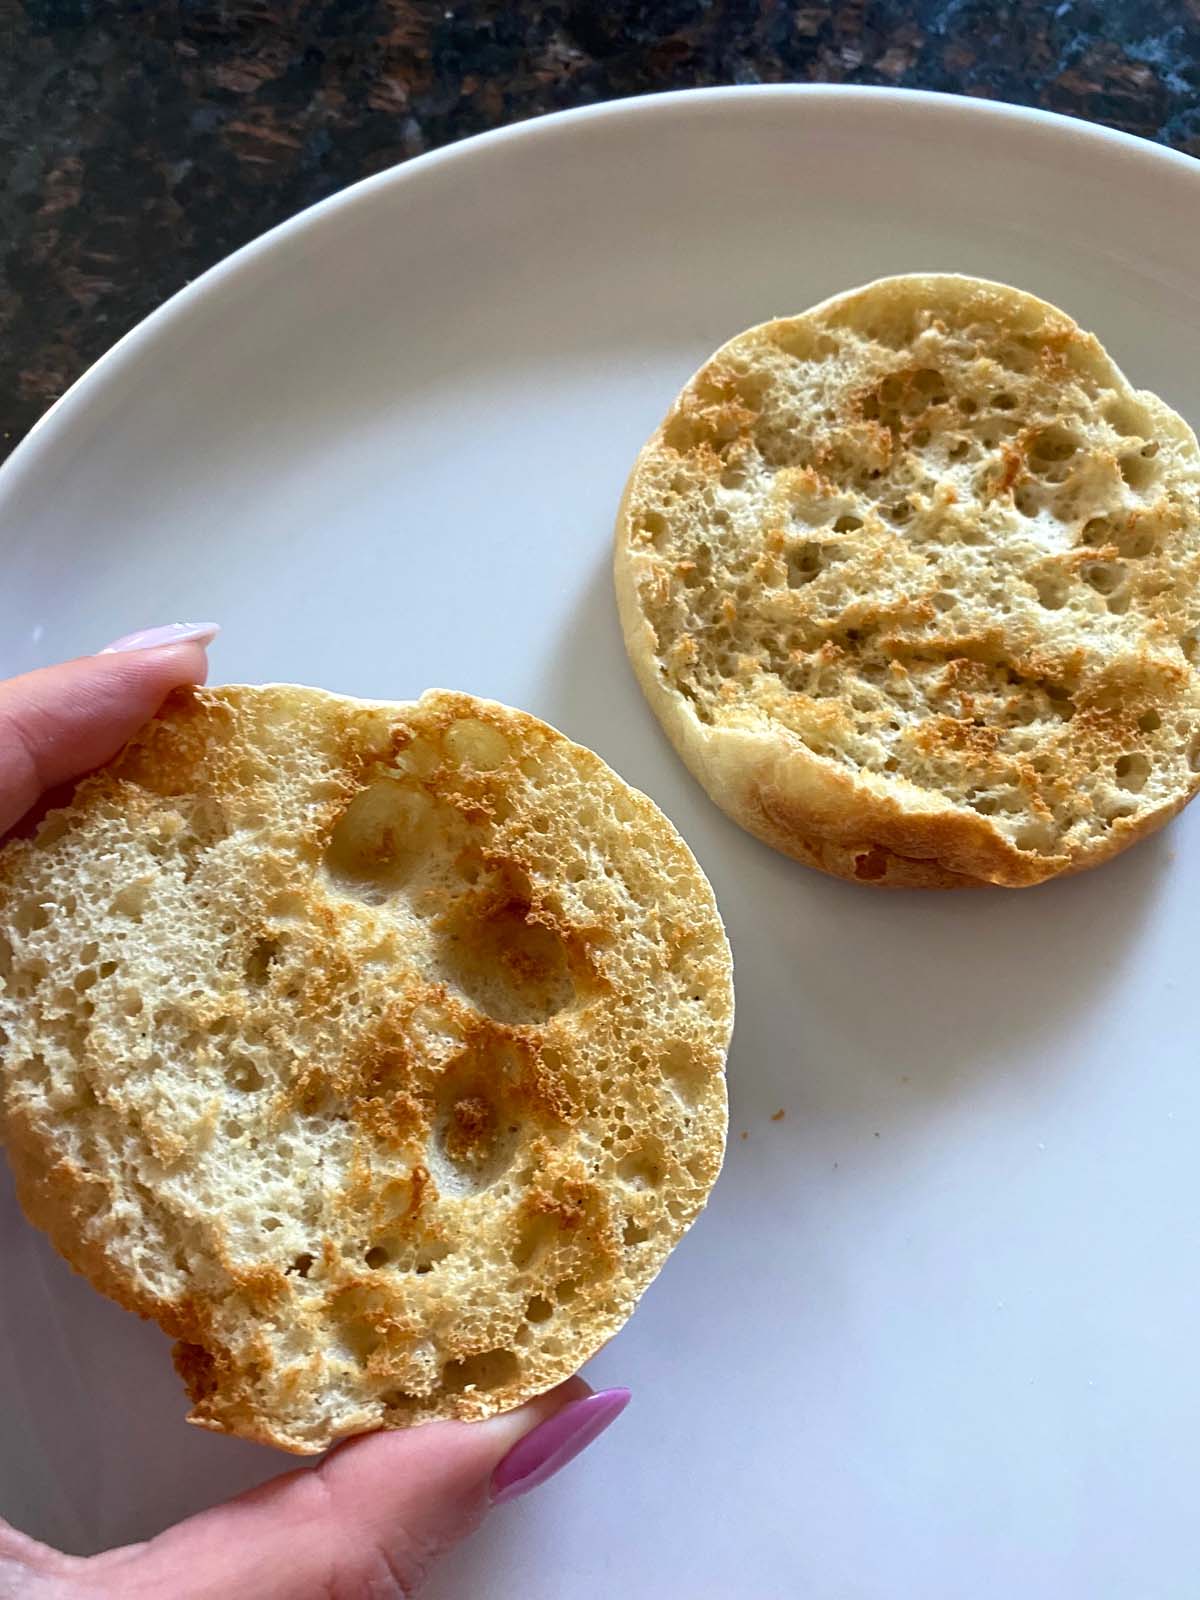 Toasted english muffin on a white plate.